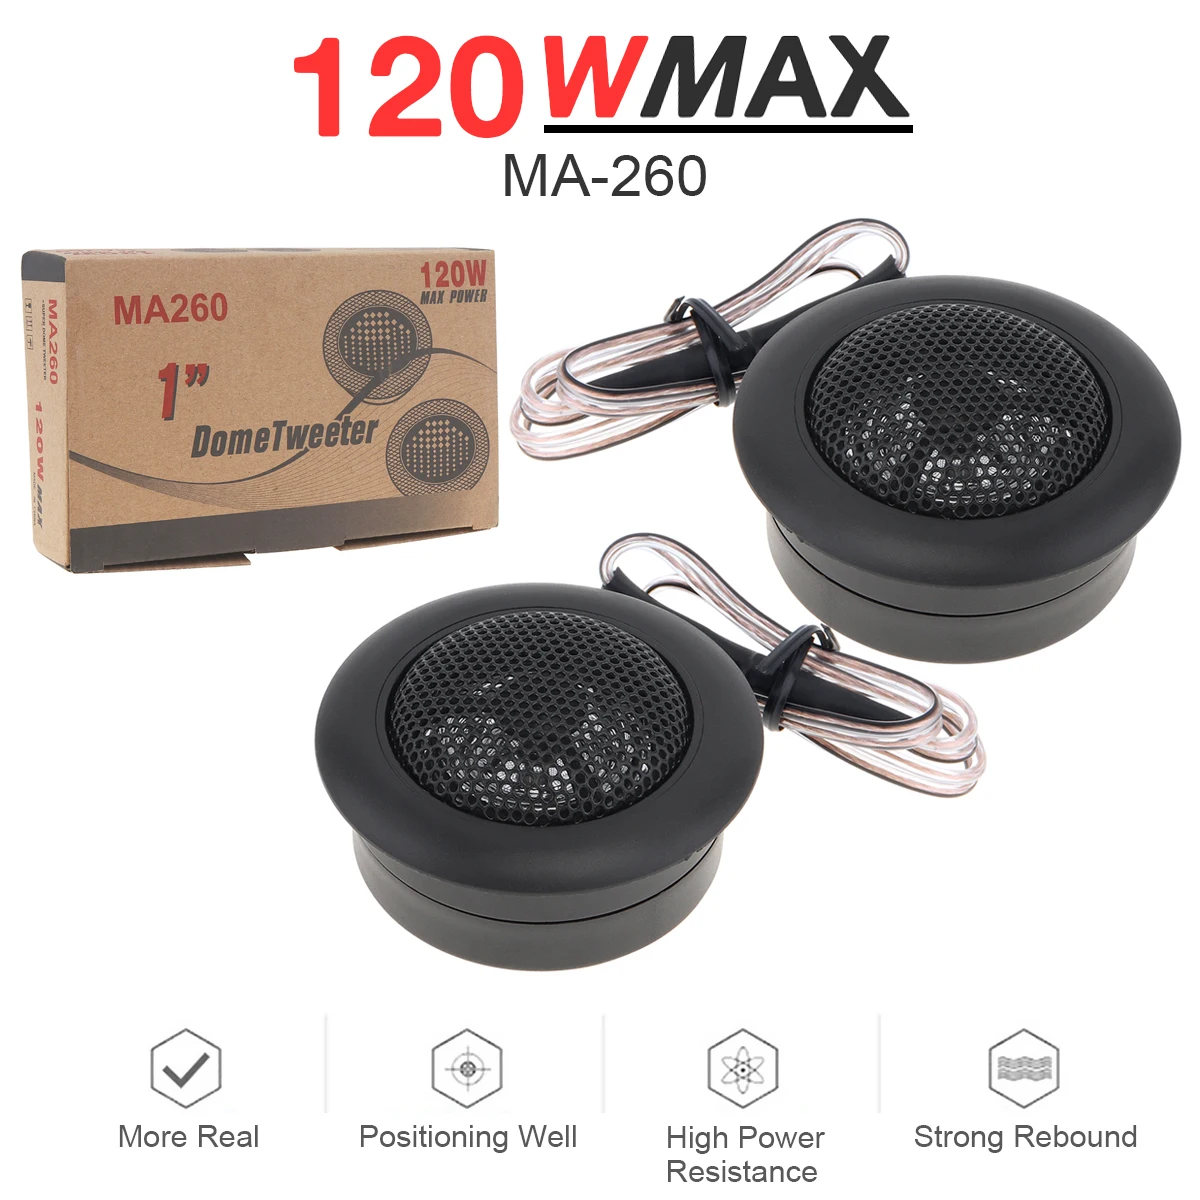 

2pcs 120W High Efficiency Universal Mini Dome Tweeter Speakers for Car Audio System